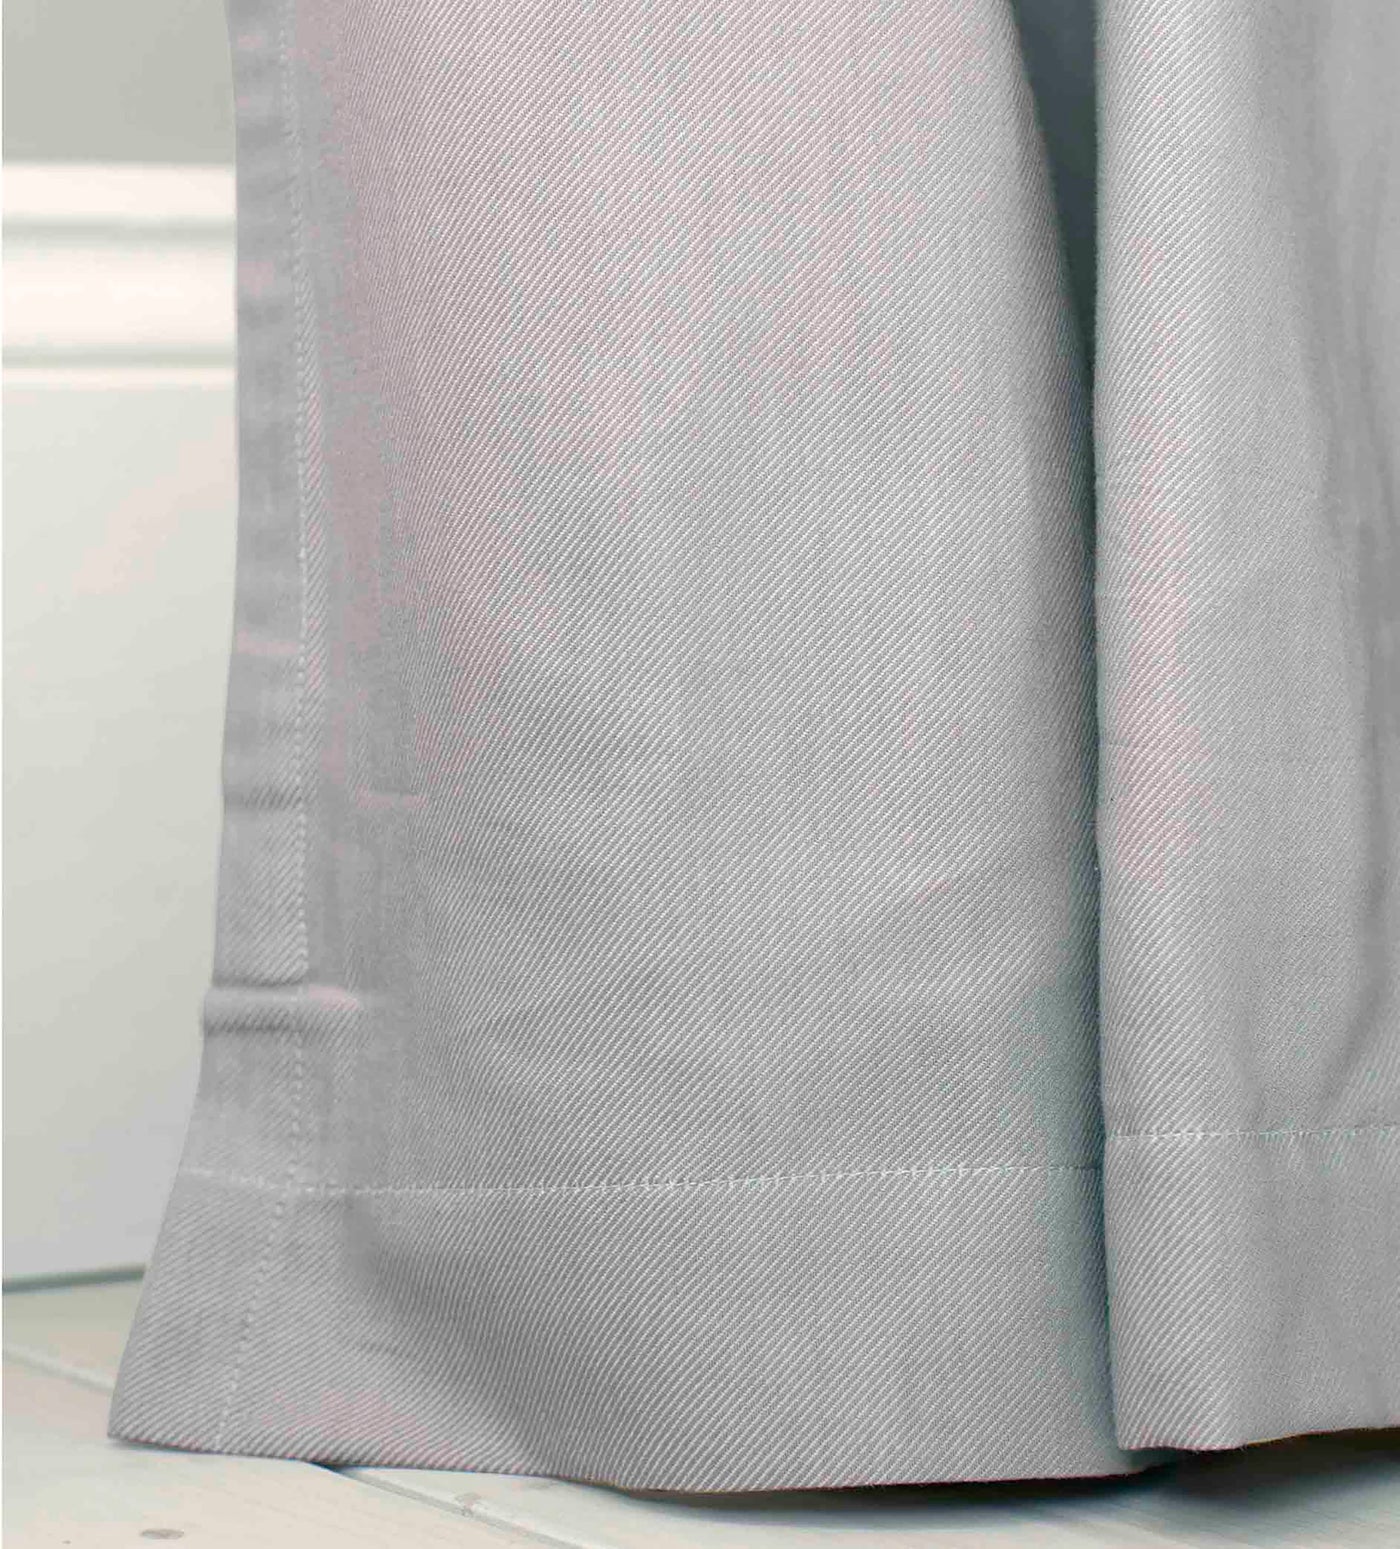 Relaxed Denim Dove Grey Curtain Detail